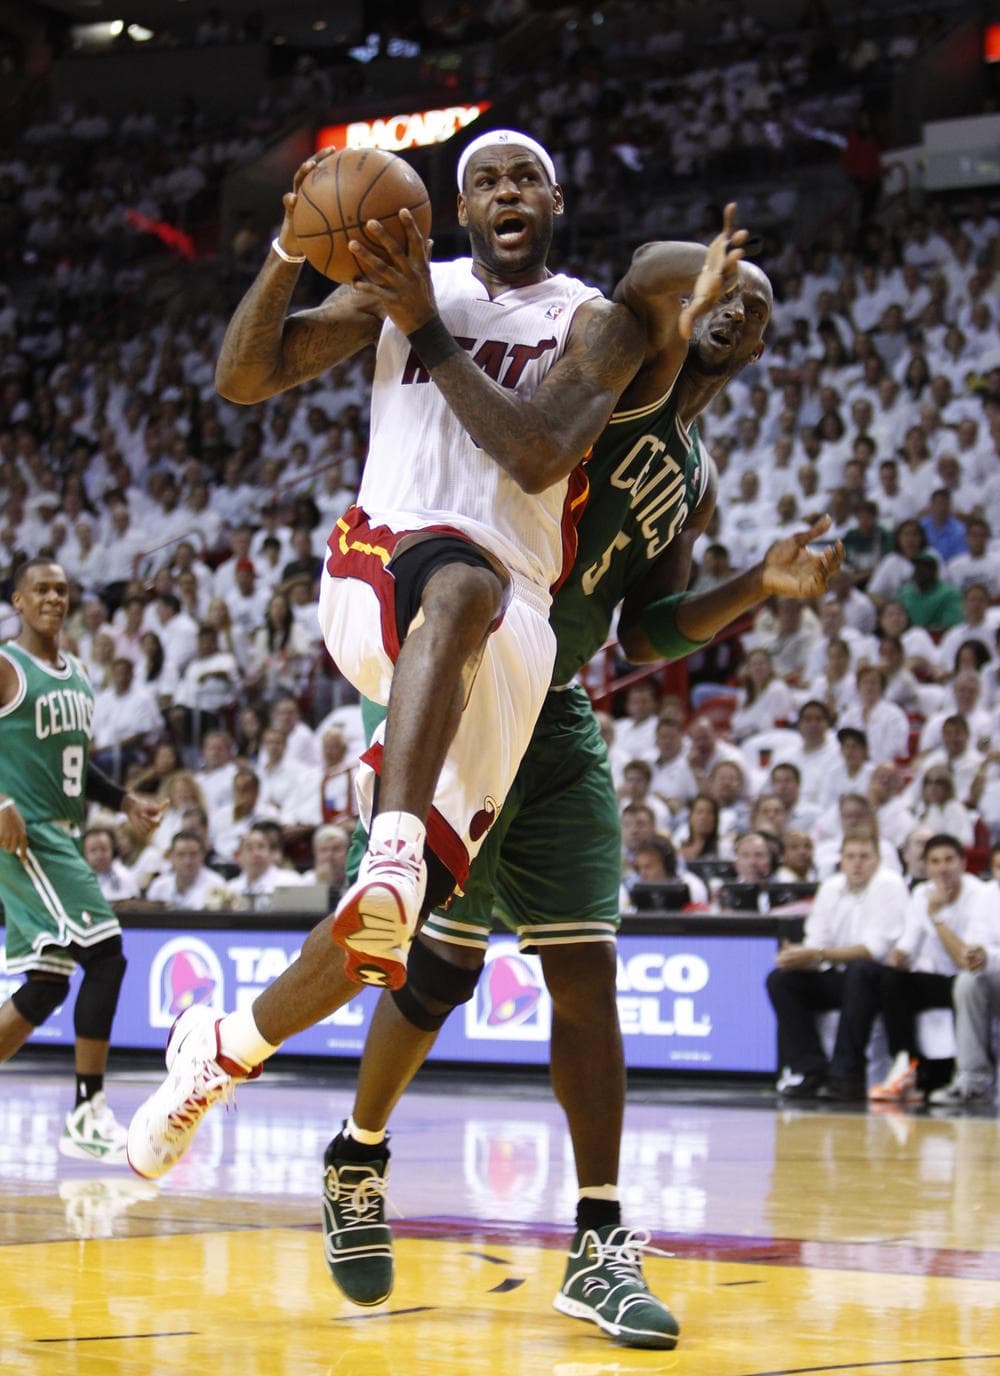 Miami Heat's LeBron James goes up for a shot against Boston Celtics' Kevin Garnett (5) during Game 5 of an NBA playoff basketball series, Wednesday, May 11, 2011 in Miami. (AP)